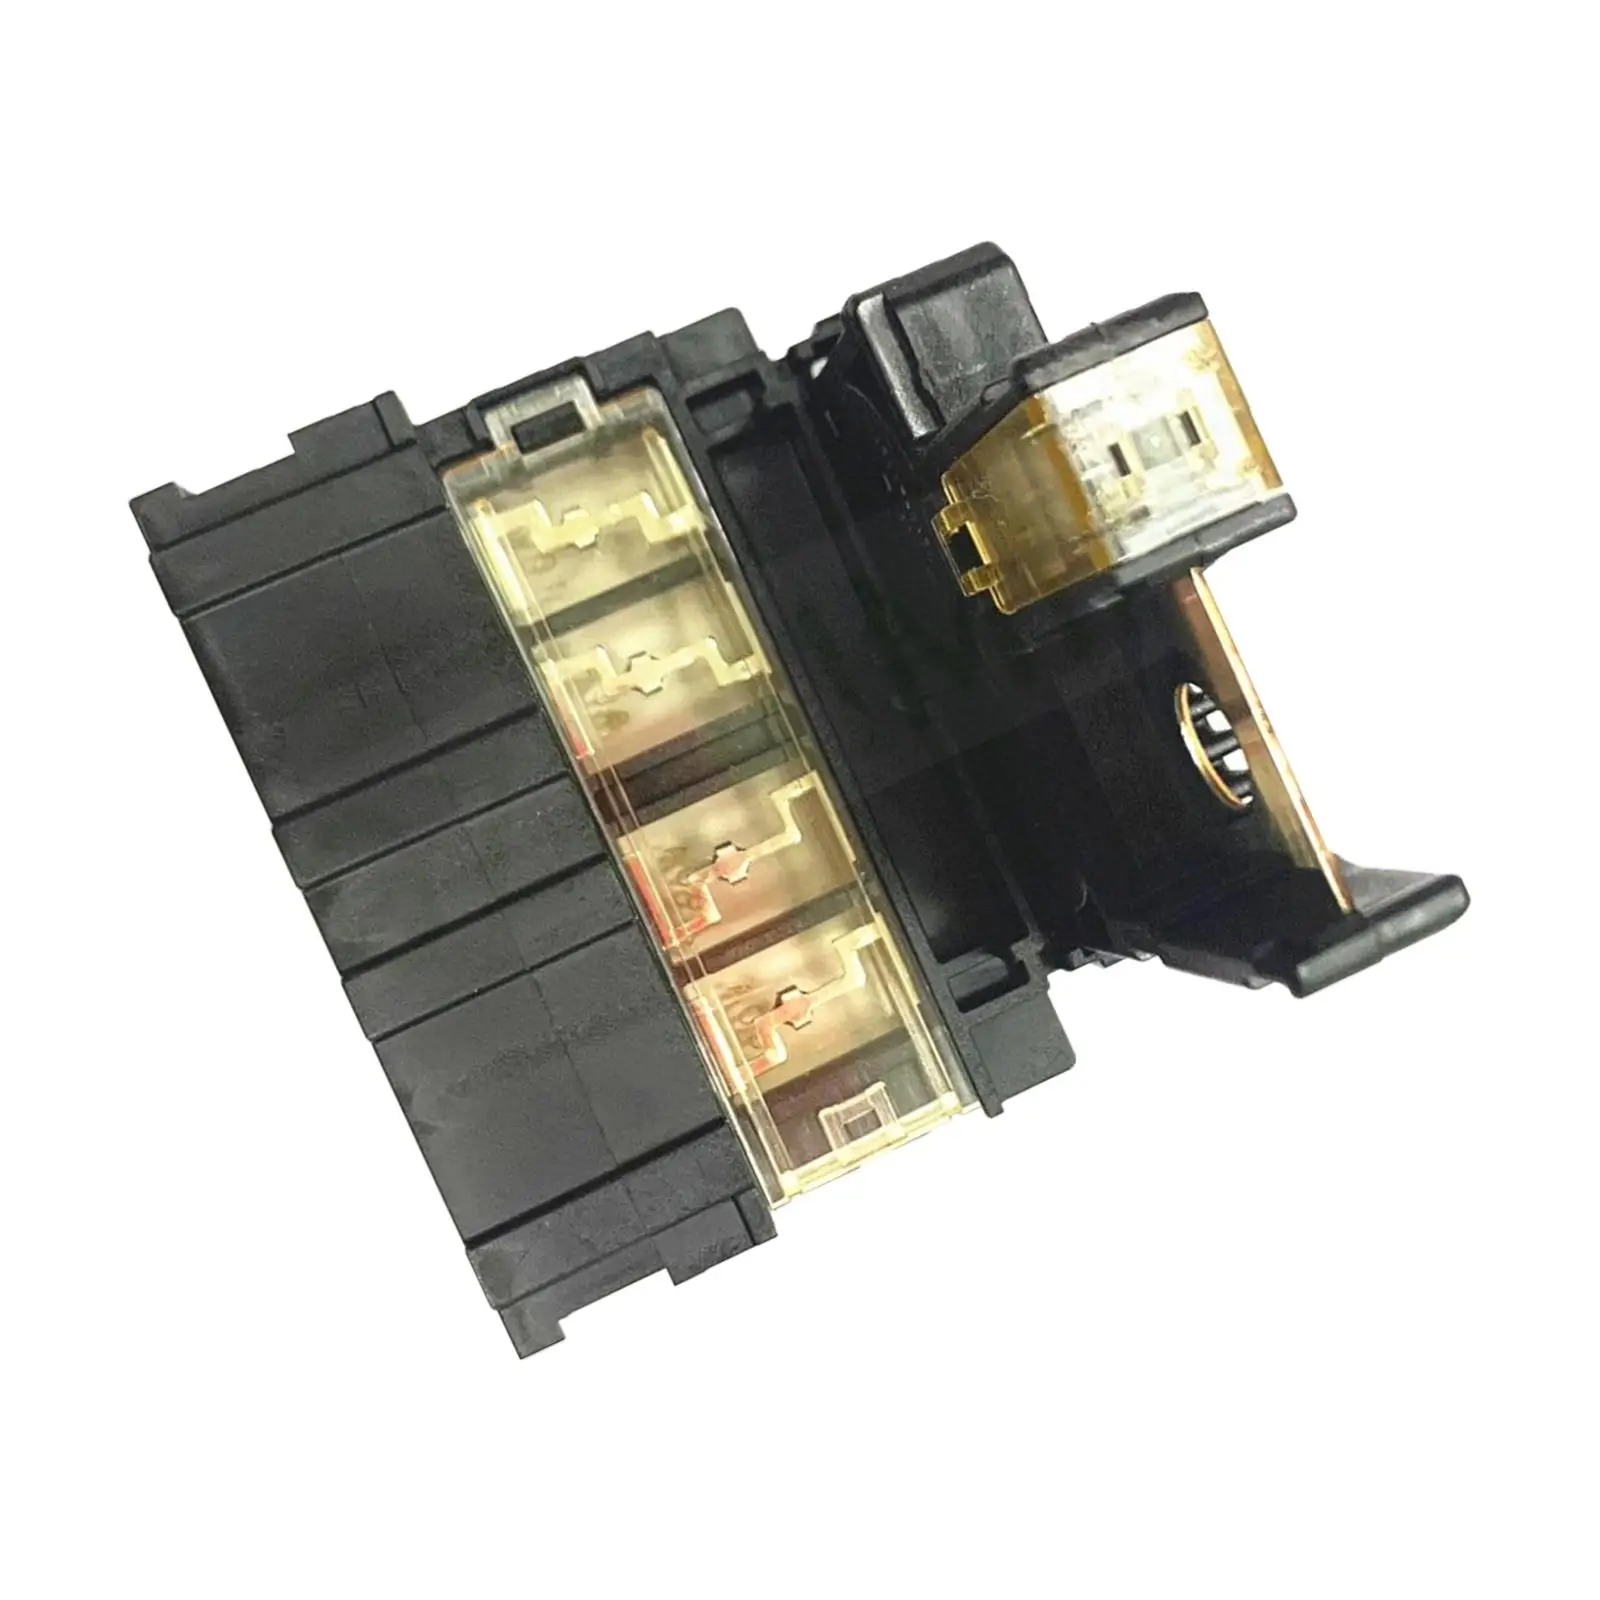 24380-79912 24340-ja74A High Performance Battery Circuit Fuse Replaces Premium Durable for Suzuki Swift 2005-2010 SX4 09-13